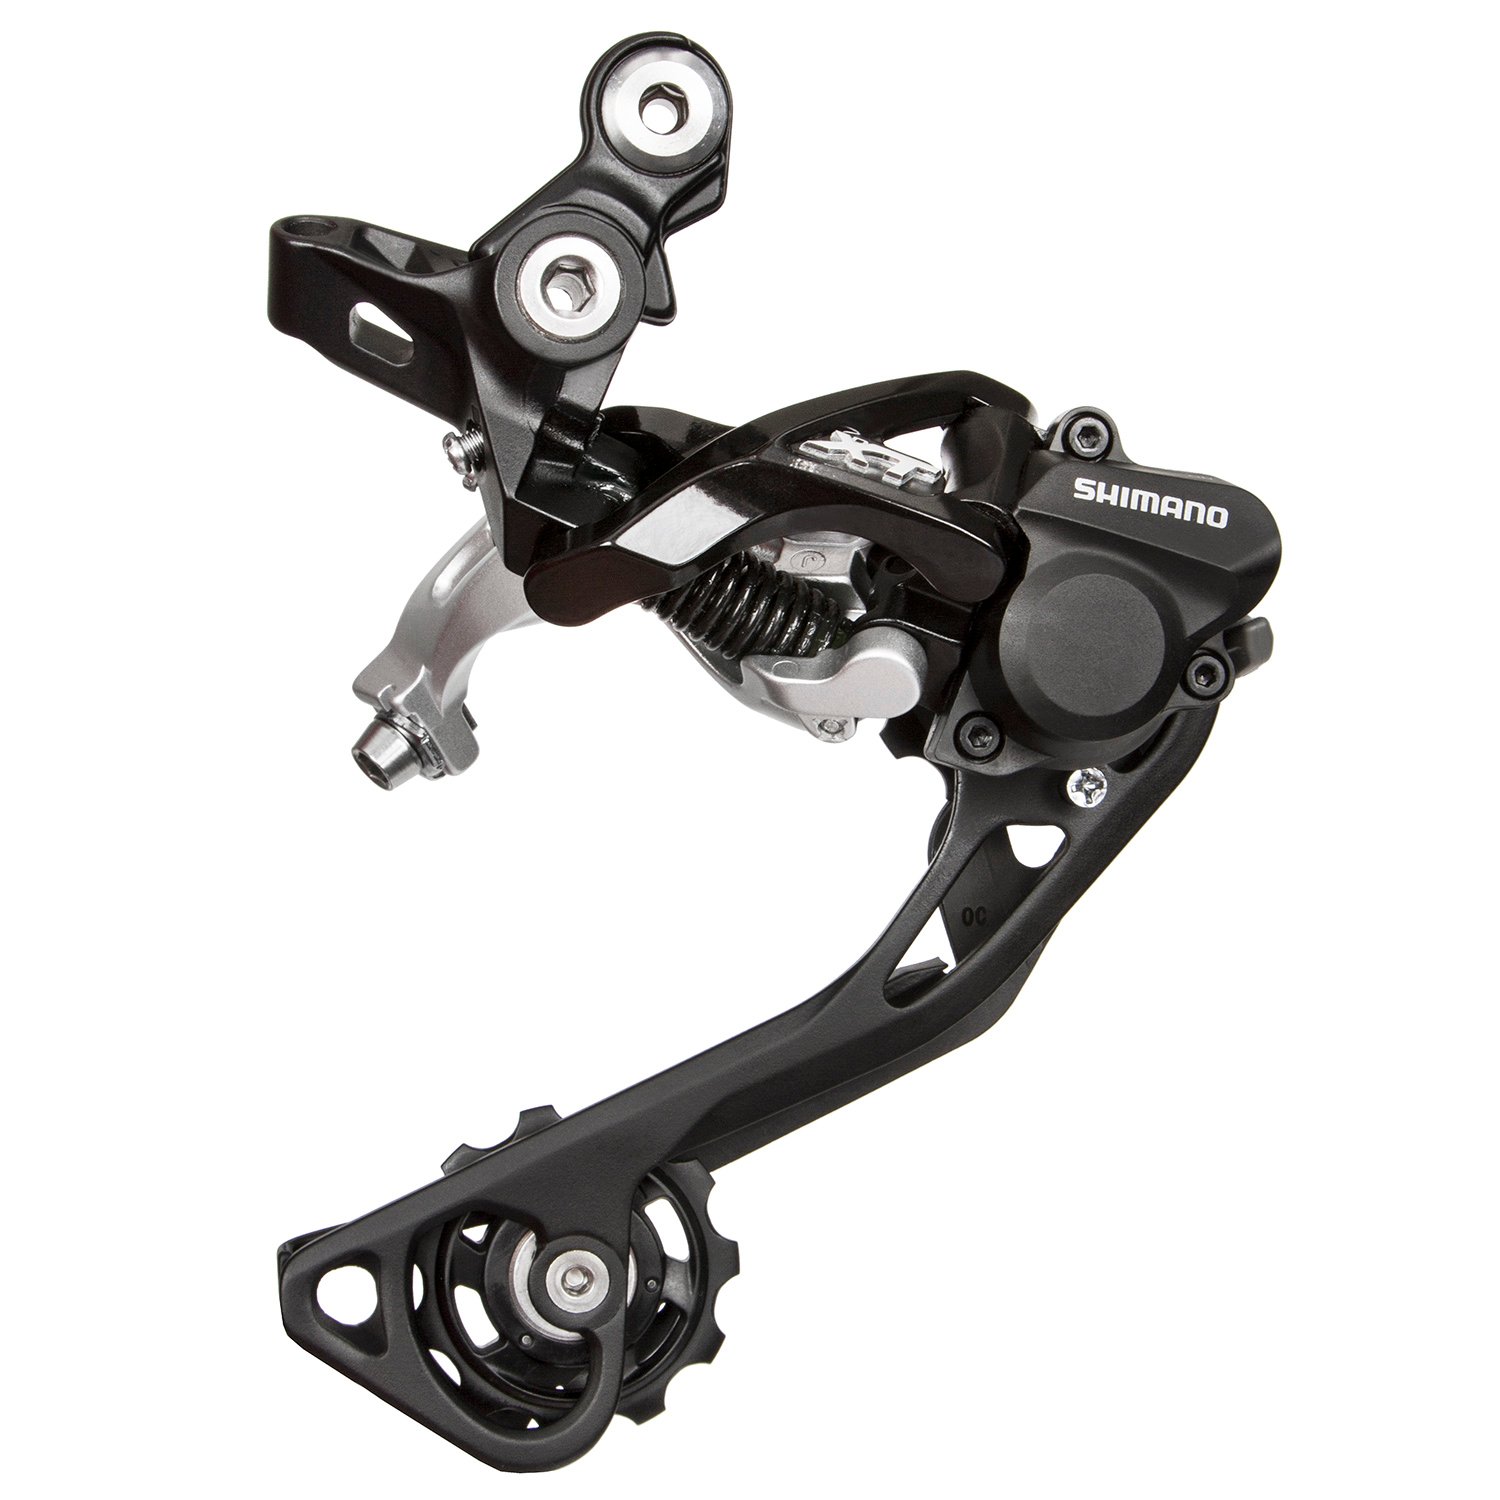 Shimano Rear Derailleur Deore XT RD-M786 10-speed, extra long Cage